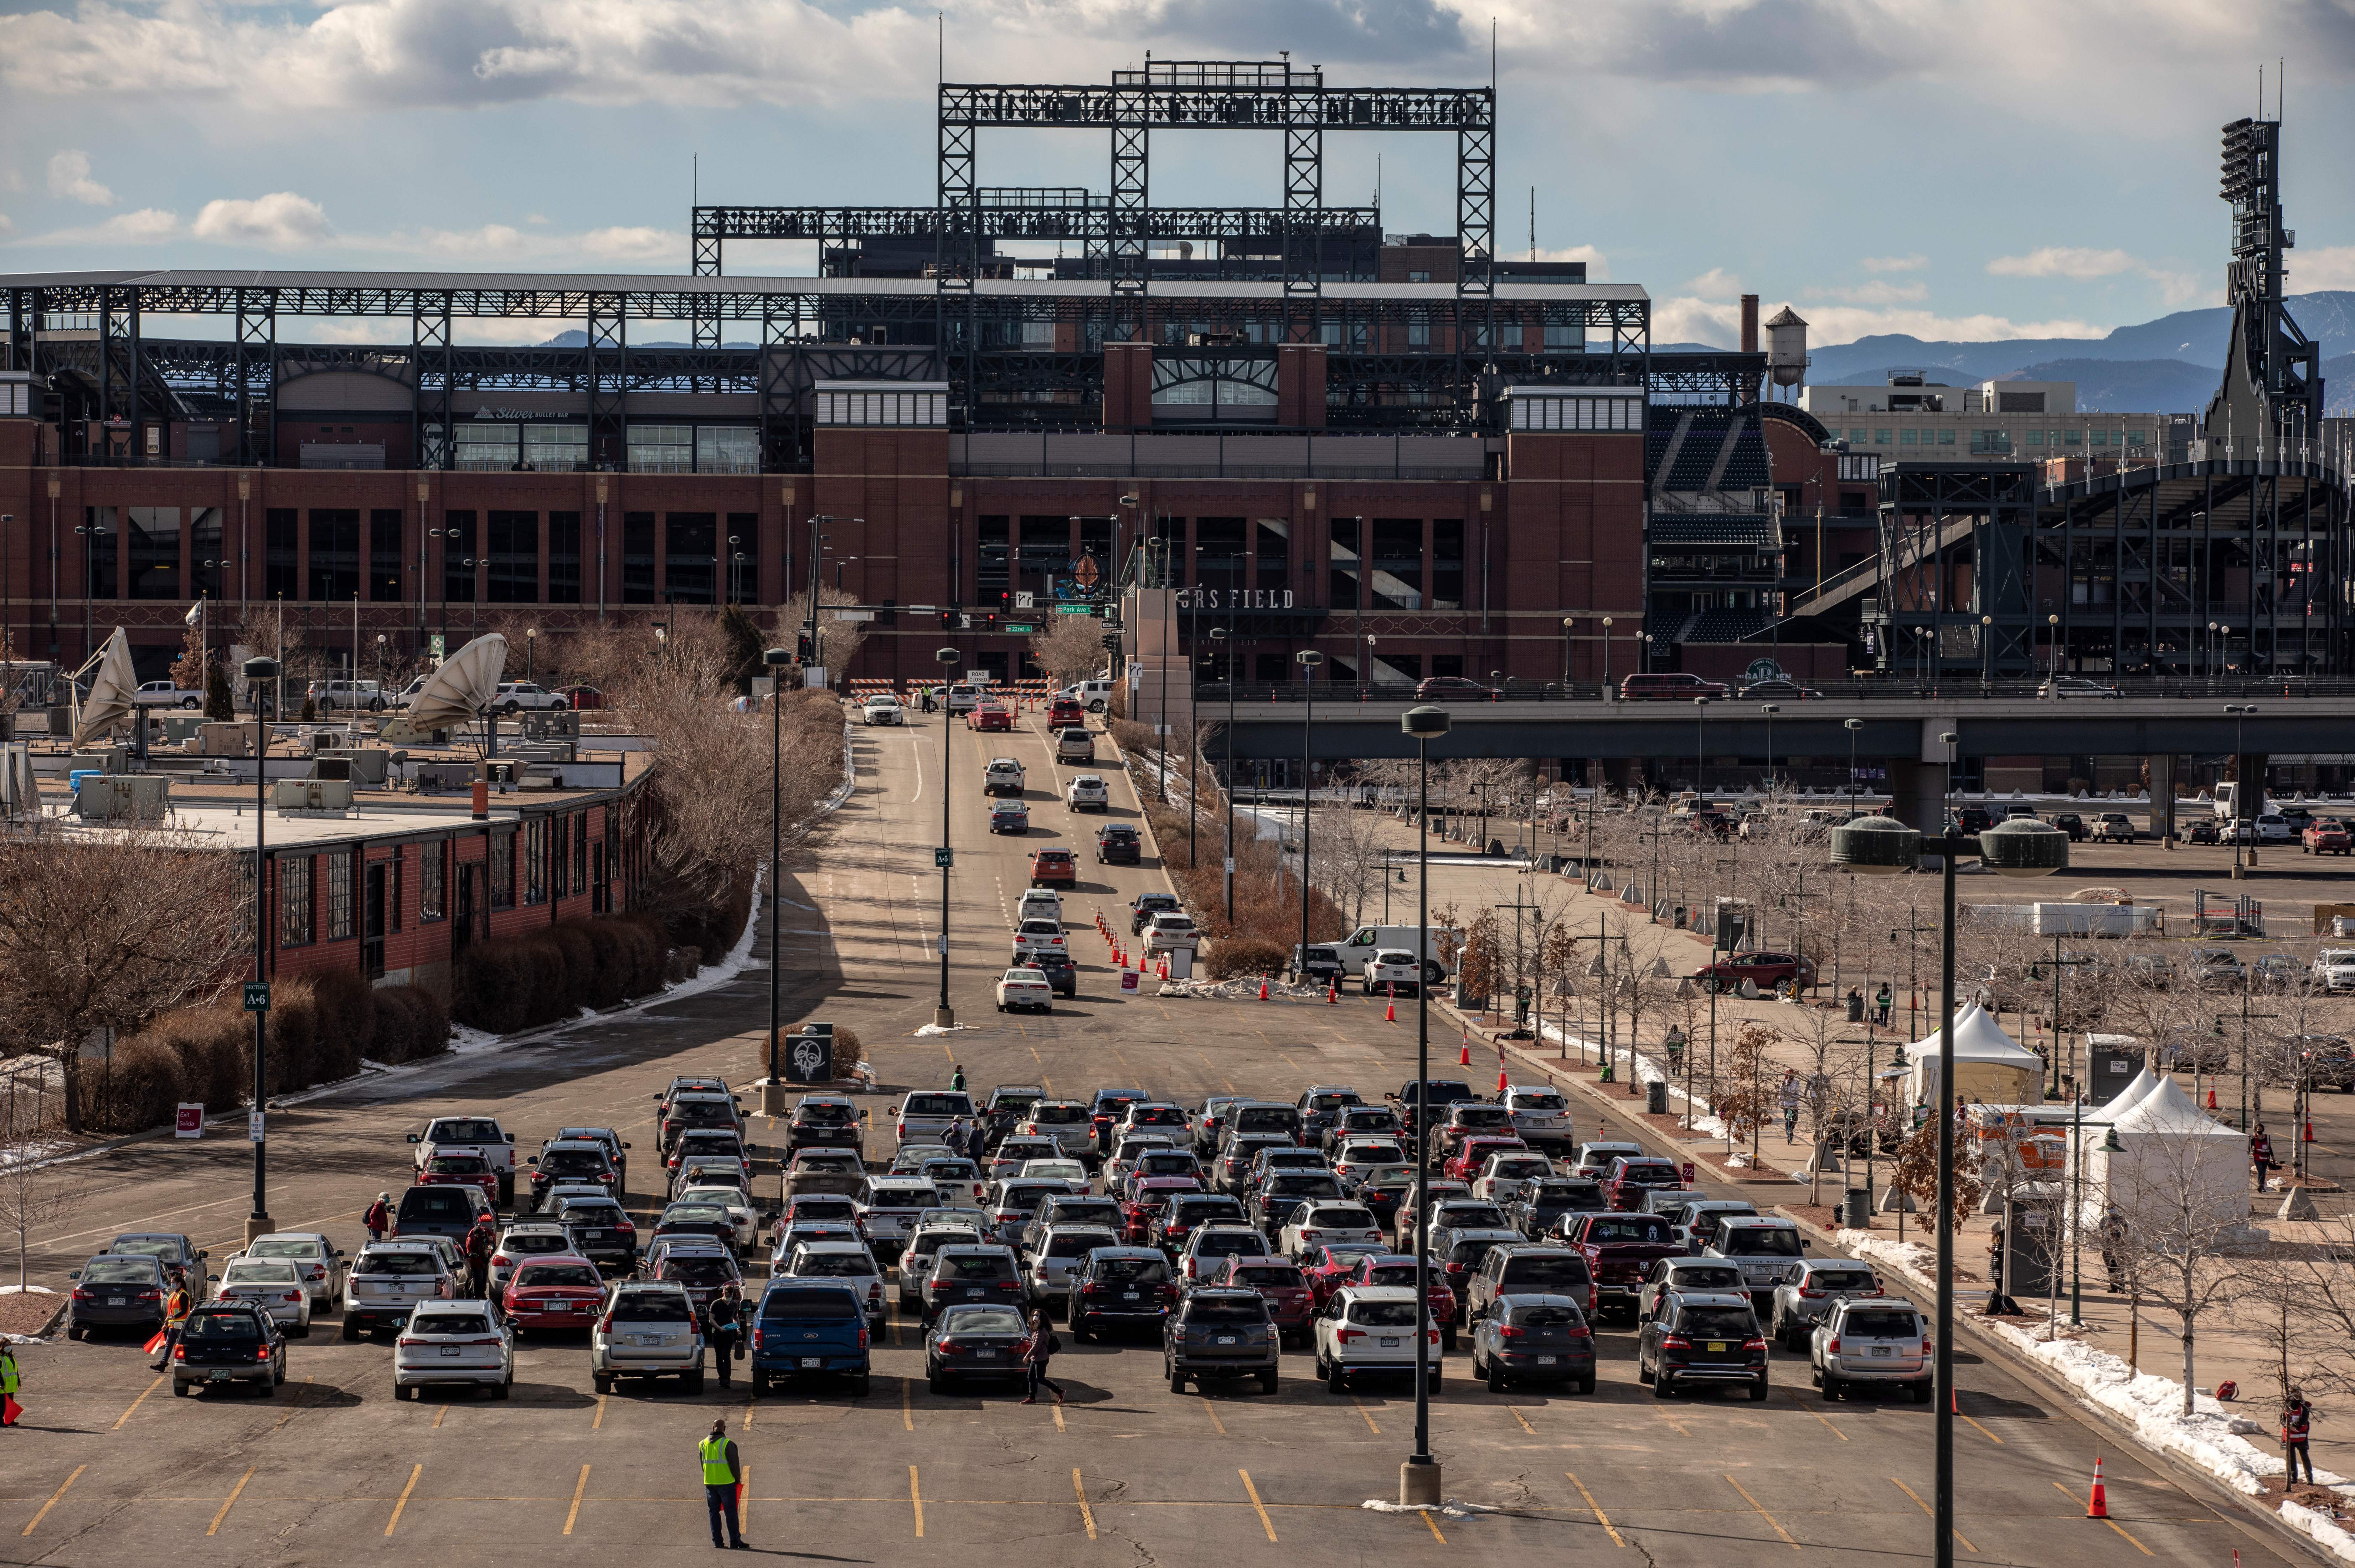 People line up for drive-through COVID-19 vaccination at Coors Field baseball stadium in Denver on Saturday, Jan. 30, 2021. Chet Strange/AFP via Getty Images